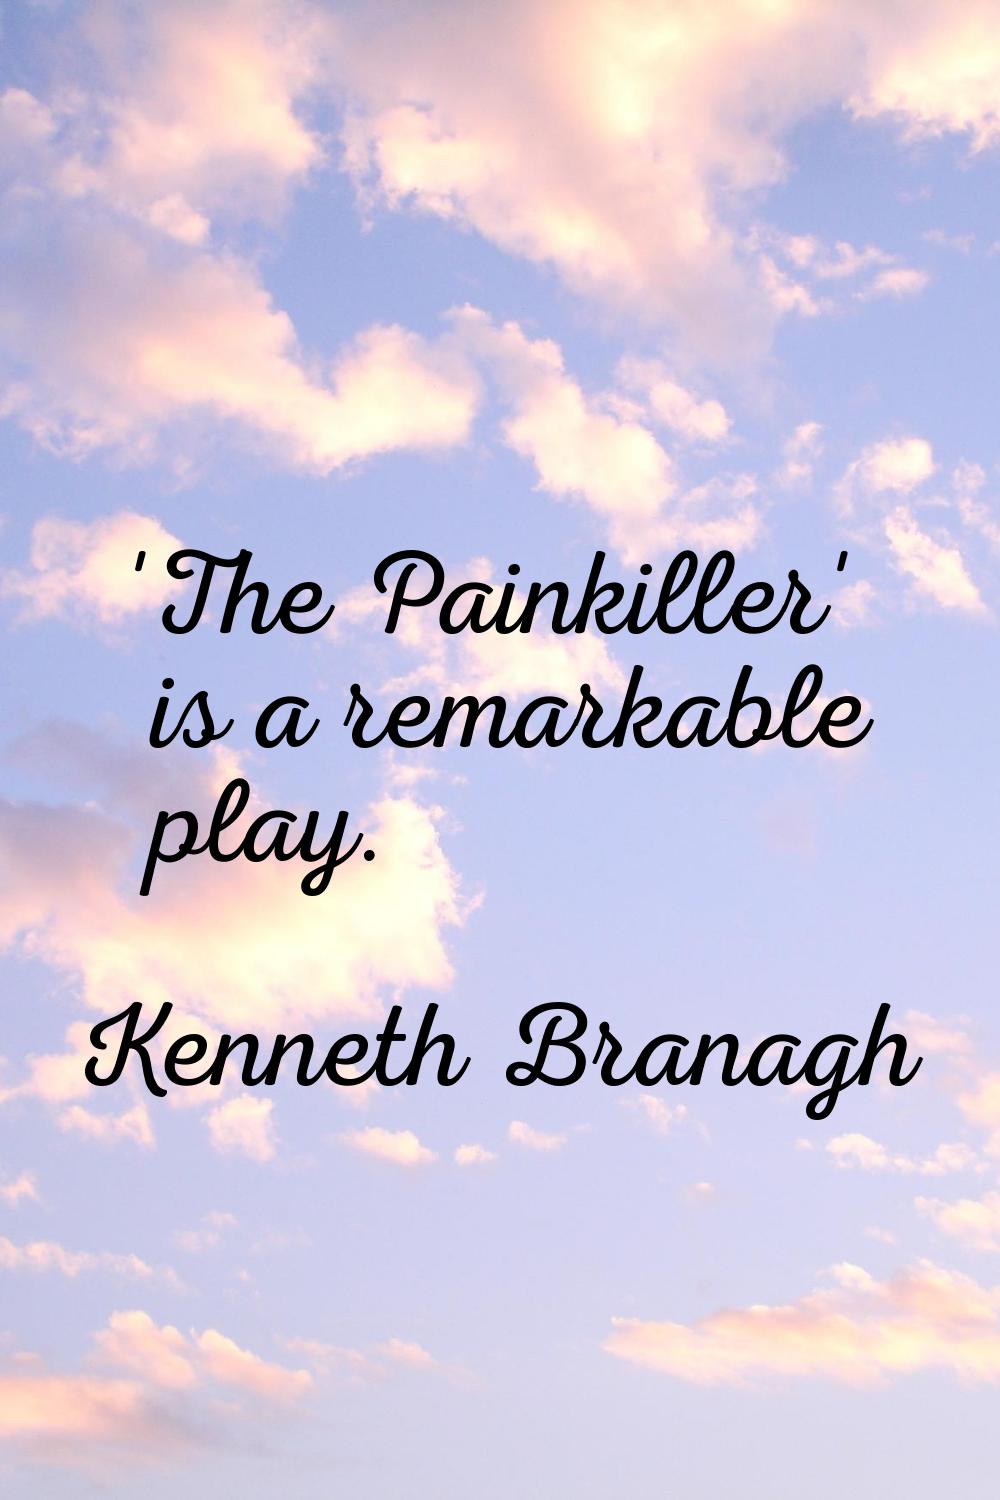 'The Painkiller' is a remarkable play.